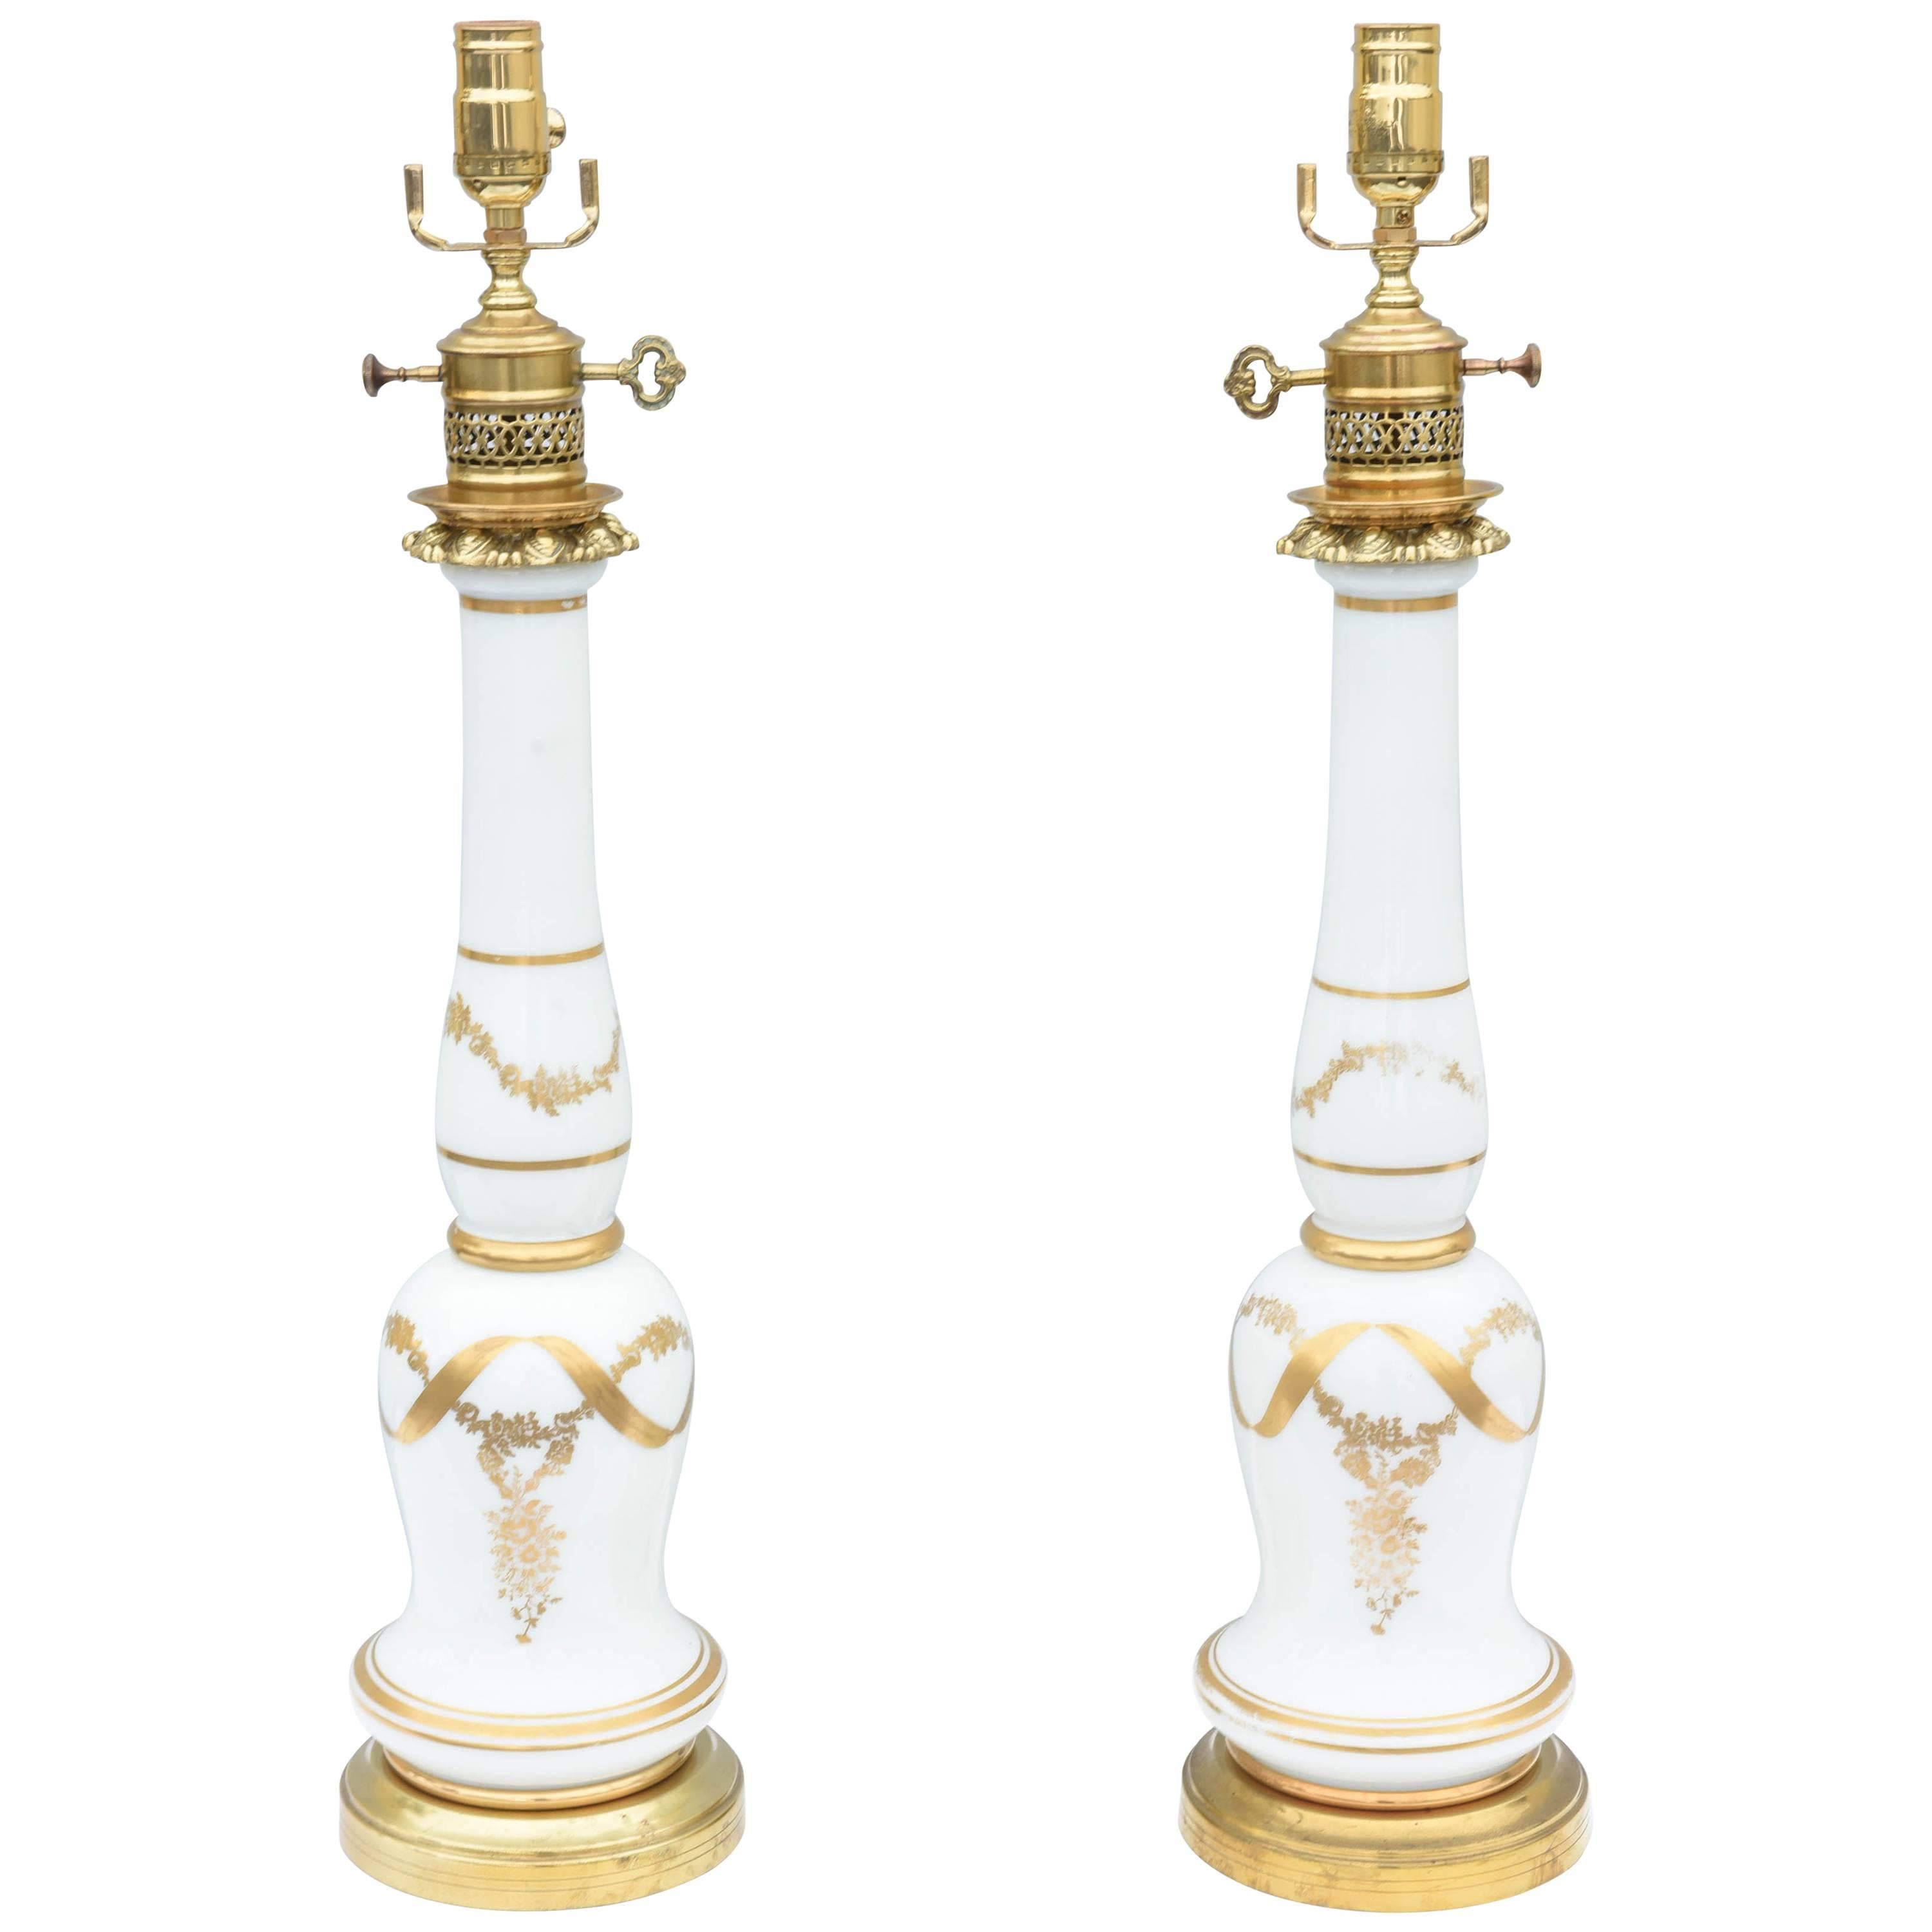 Pair of Empire Style Milk Glass Lamps with Hand Painted Gilding